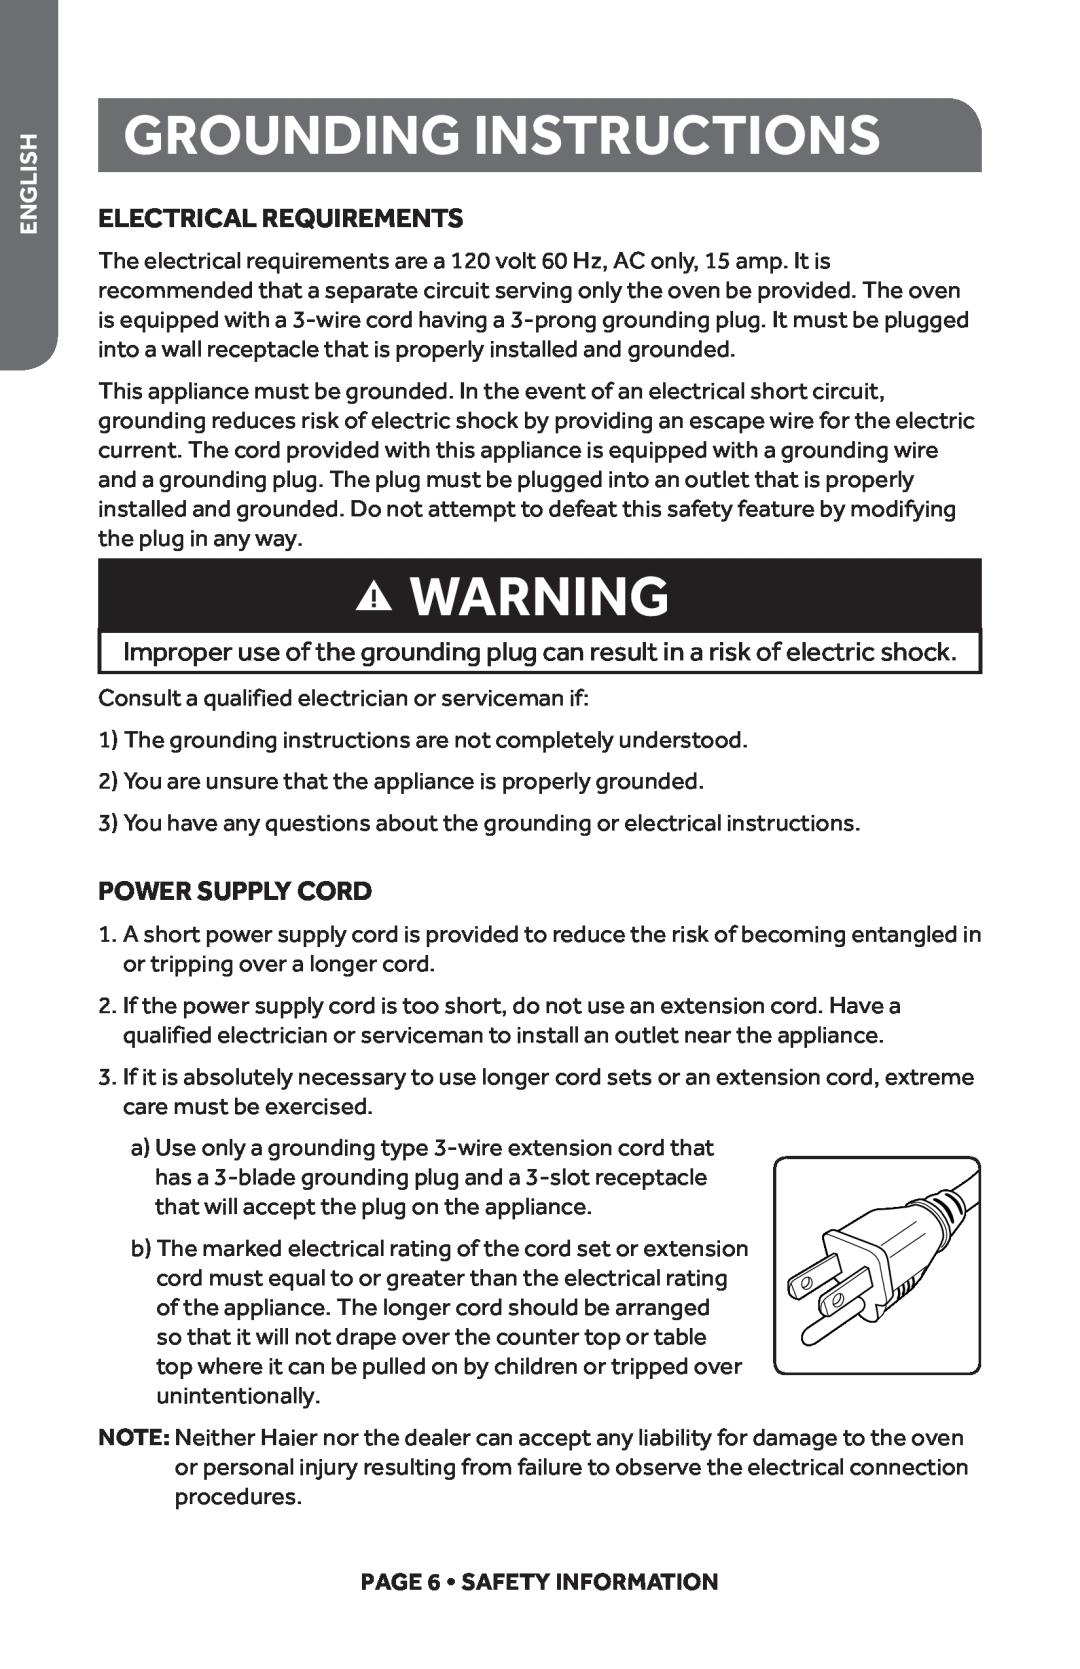 Haier HMC610BEWW Grounding Instructions, Electrical Requirements, Power Supply Cord, English, PAGE 6 SAFETY INFORMATION 